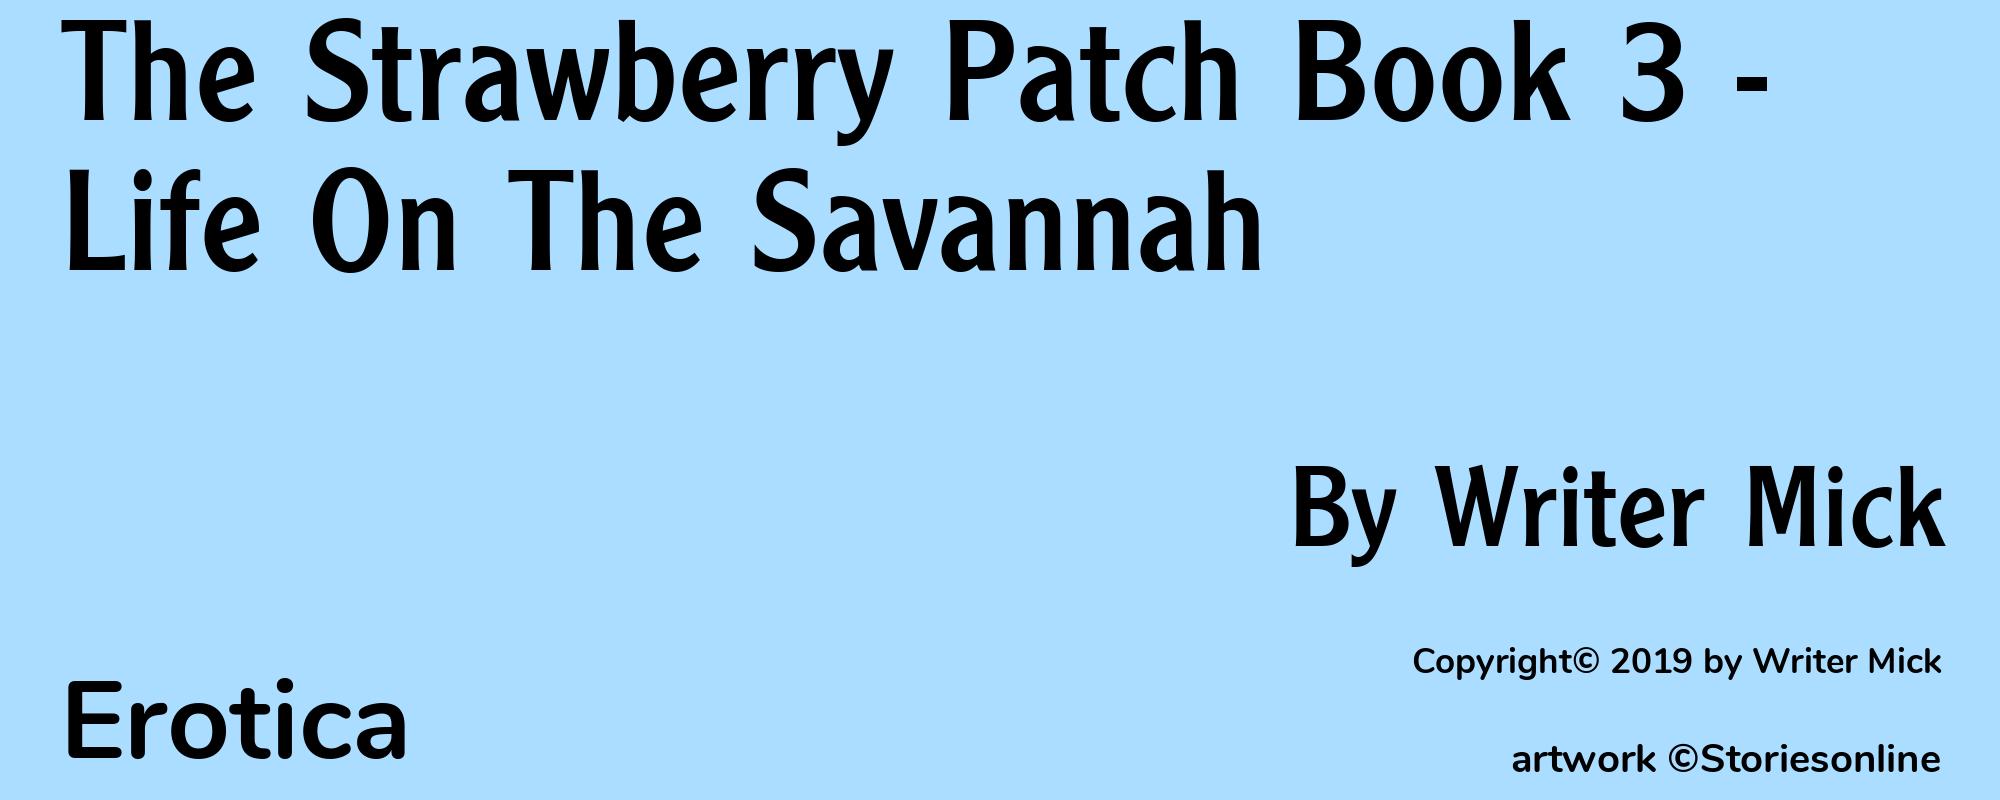 The Strawberry Patch Book 3 - Life On The Savannah - Cover